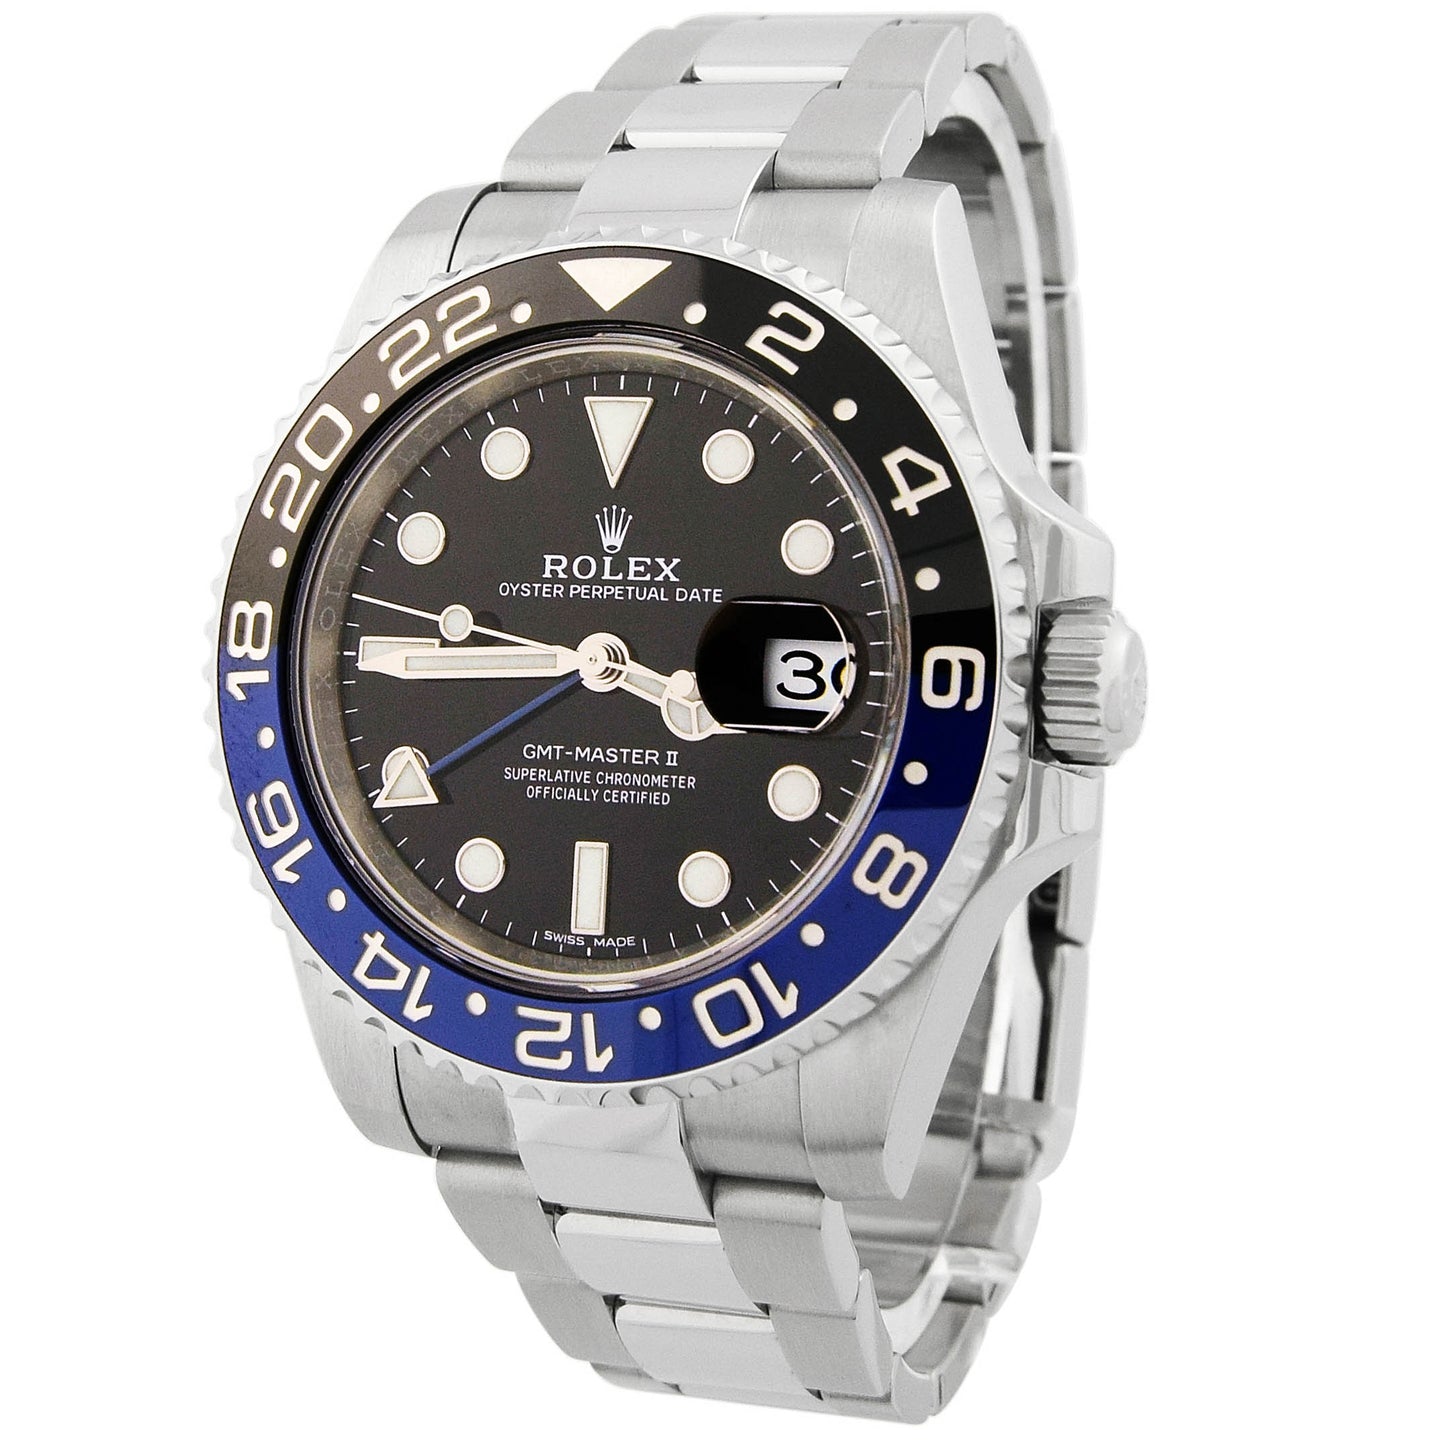 NEW! Rolex Men's II "Batman" Stainless Steel Black Dot Dial Watch Reference #: 126710BLNR | Jewelers